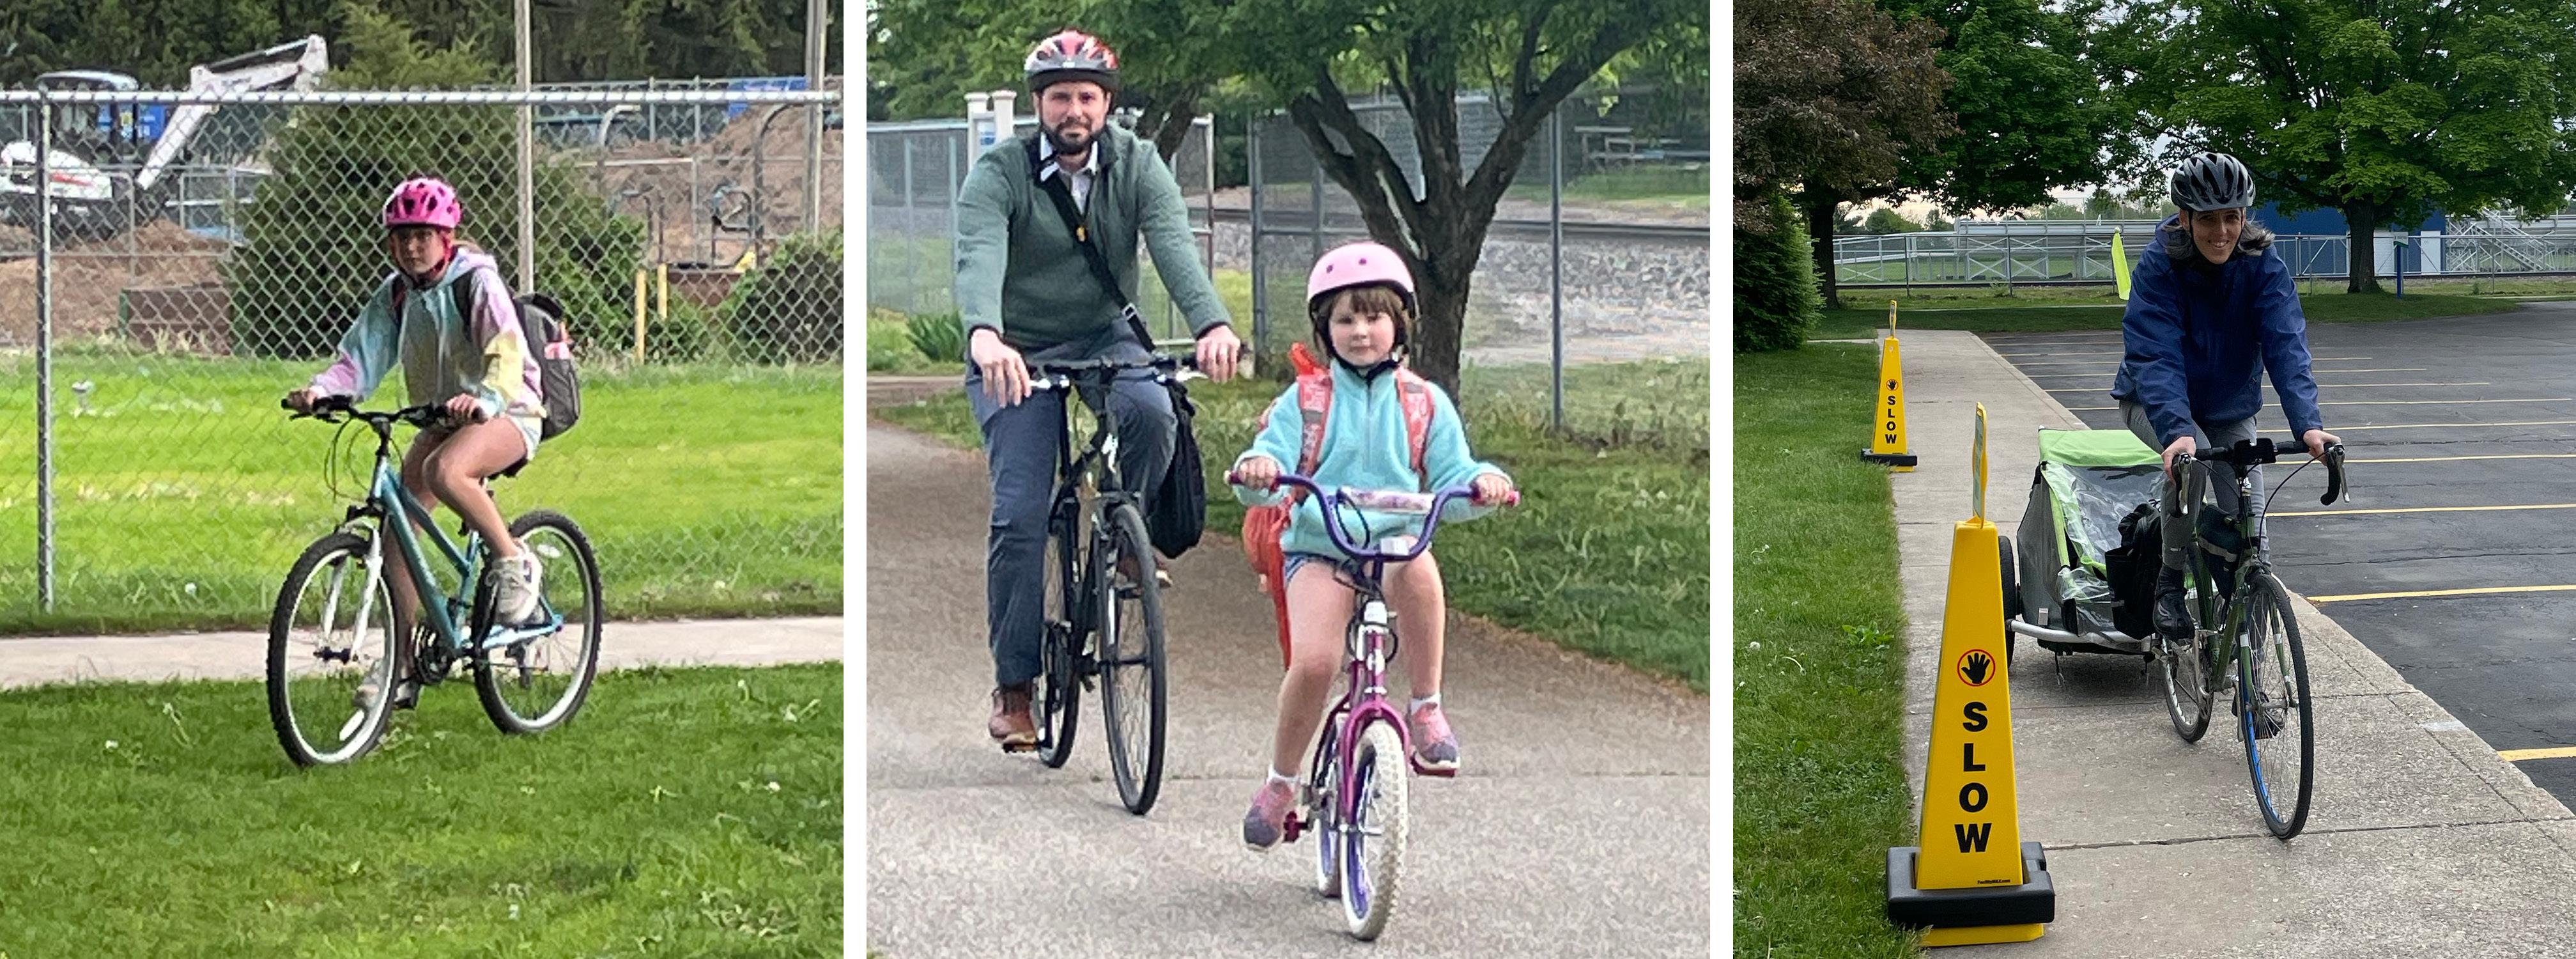 private school encourages movement through riding bikes to school 